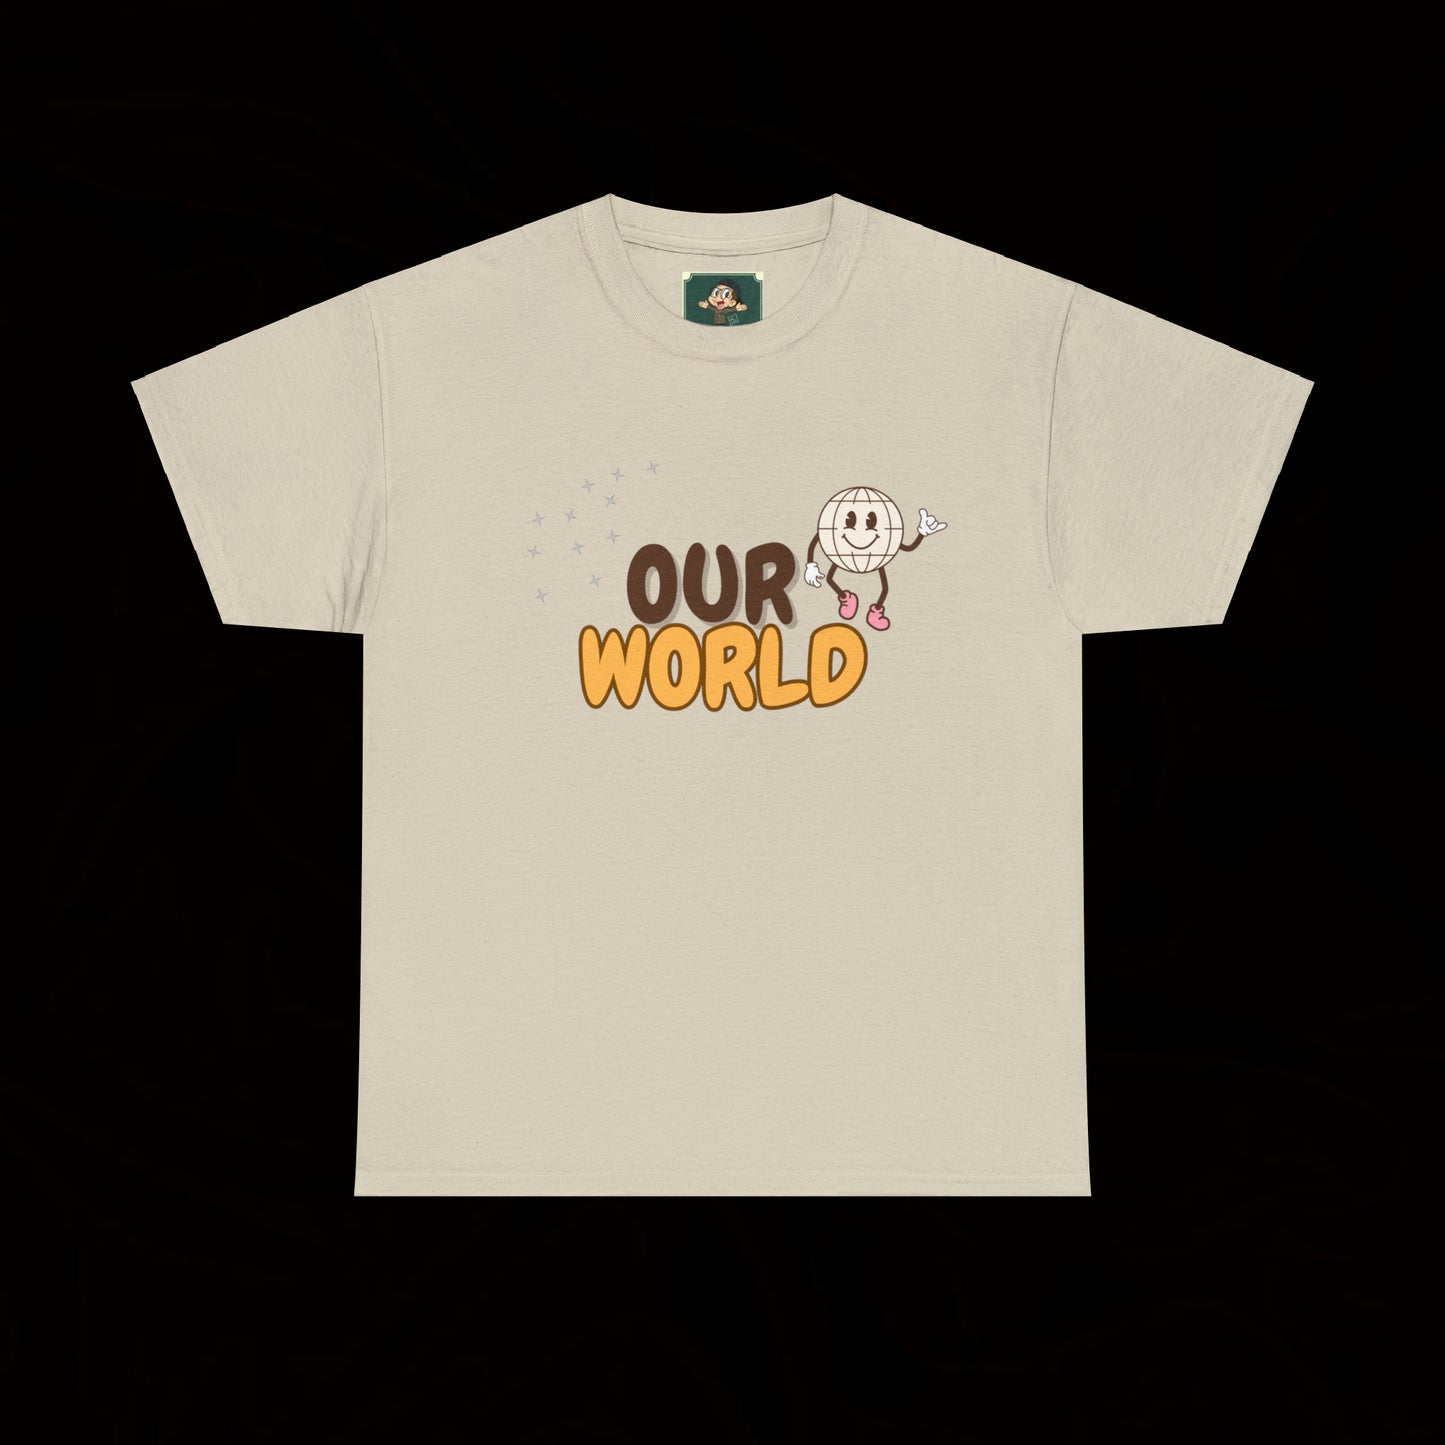 “OUR WORLD” T-Shirt